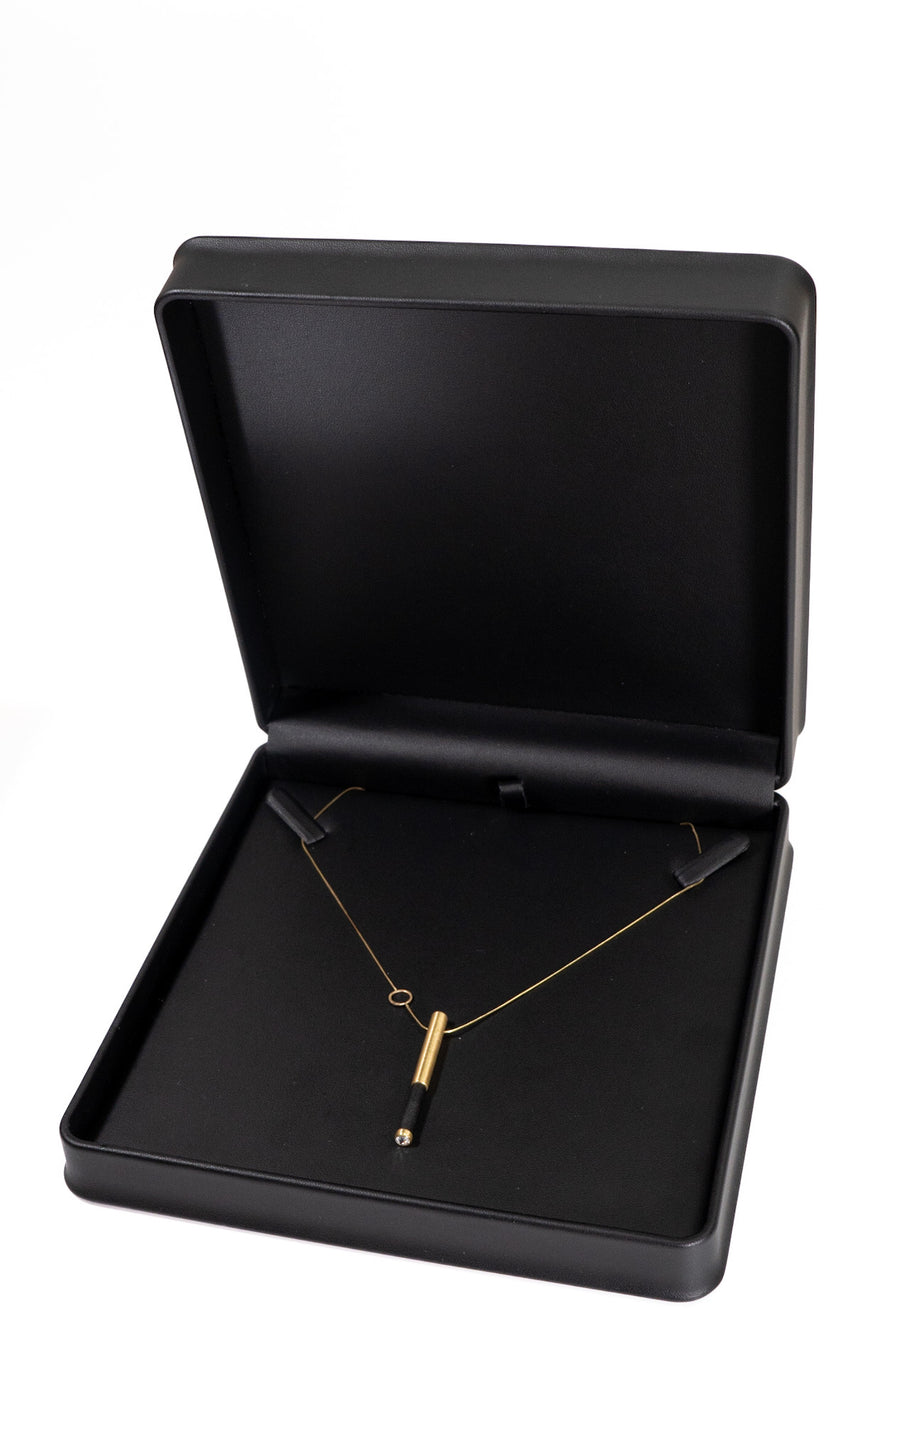 OR Obsidian Necklace 14k Yellow Gold w/Rose cut Diamond by VK Designs